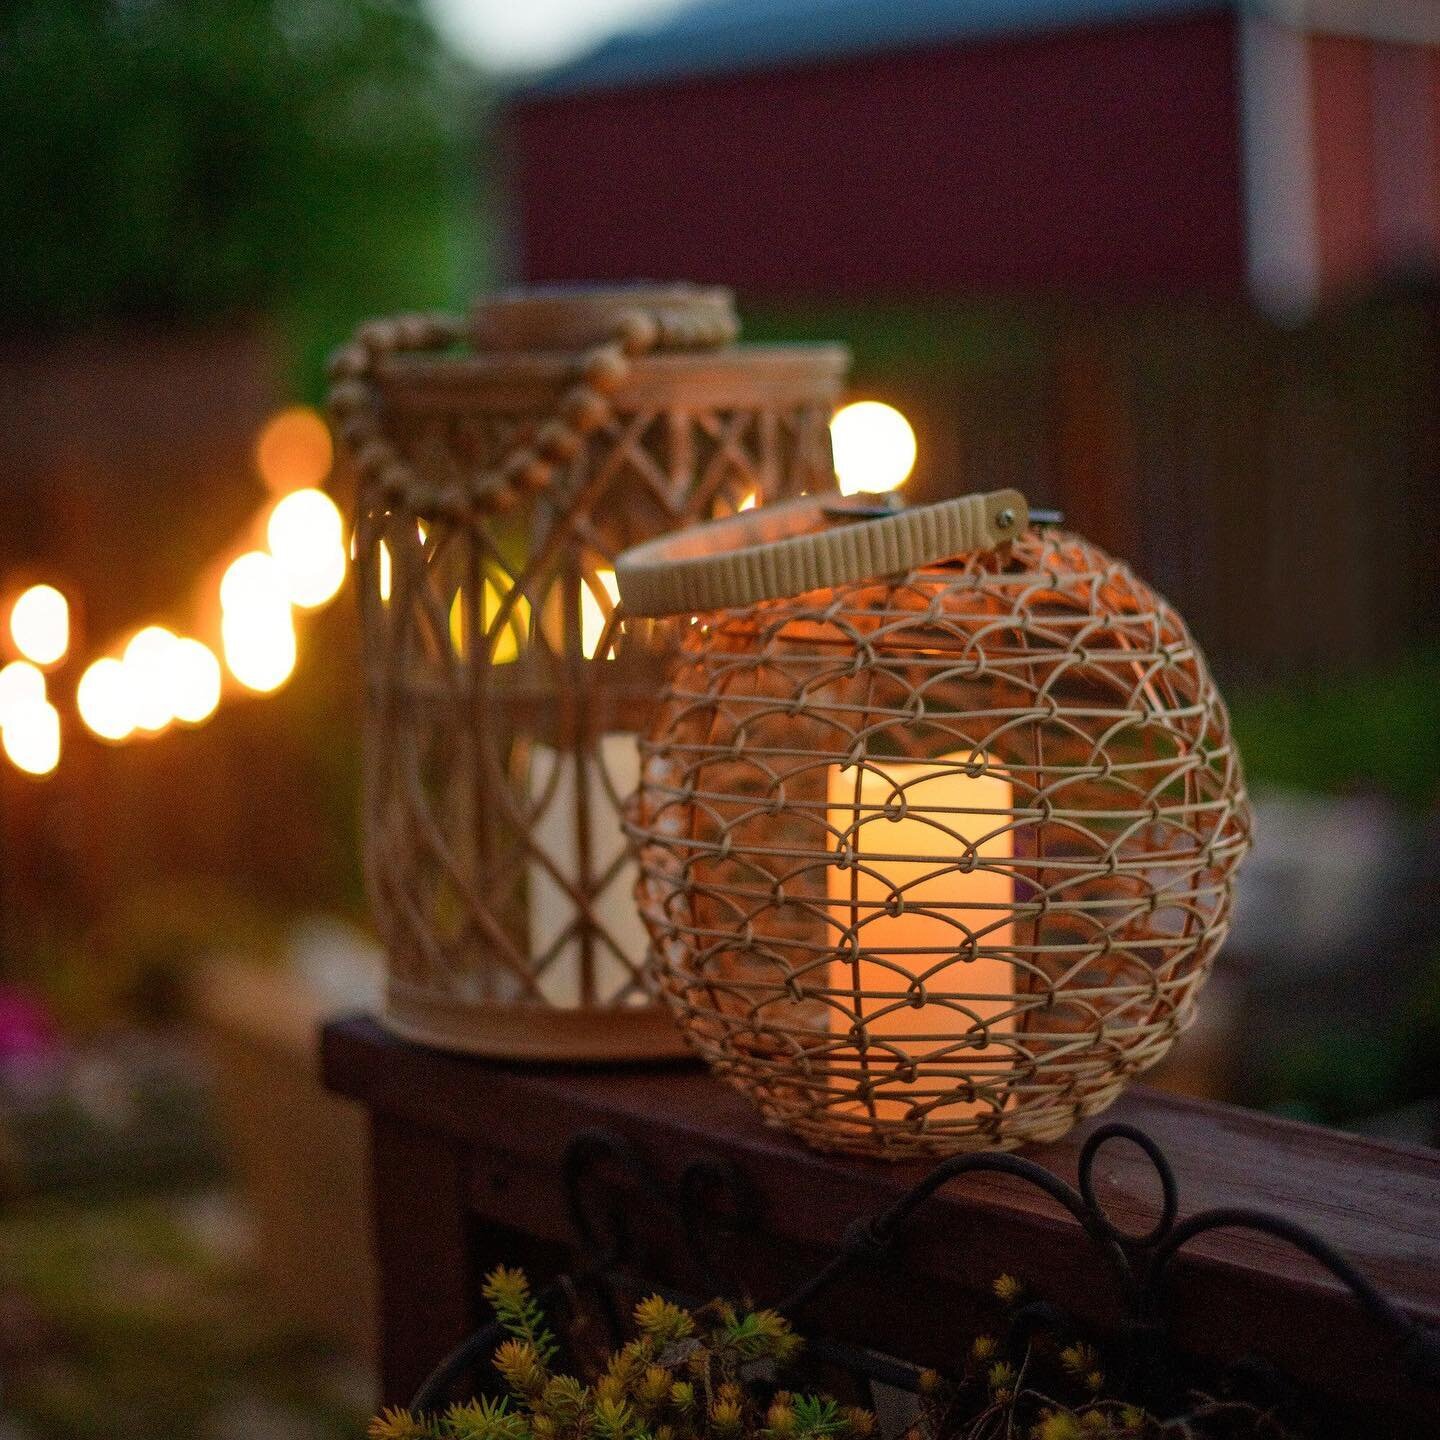 It's the first day of May, which means summer is right around the corner! 🙌 Get ready for summer nights on the patio with this new solar lighting. Featuring a woven rattan design, these lanterns are perfect for keeping the good times going after the